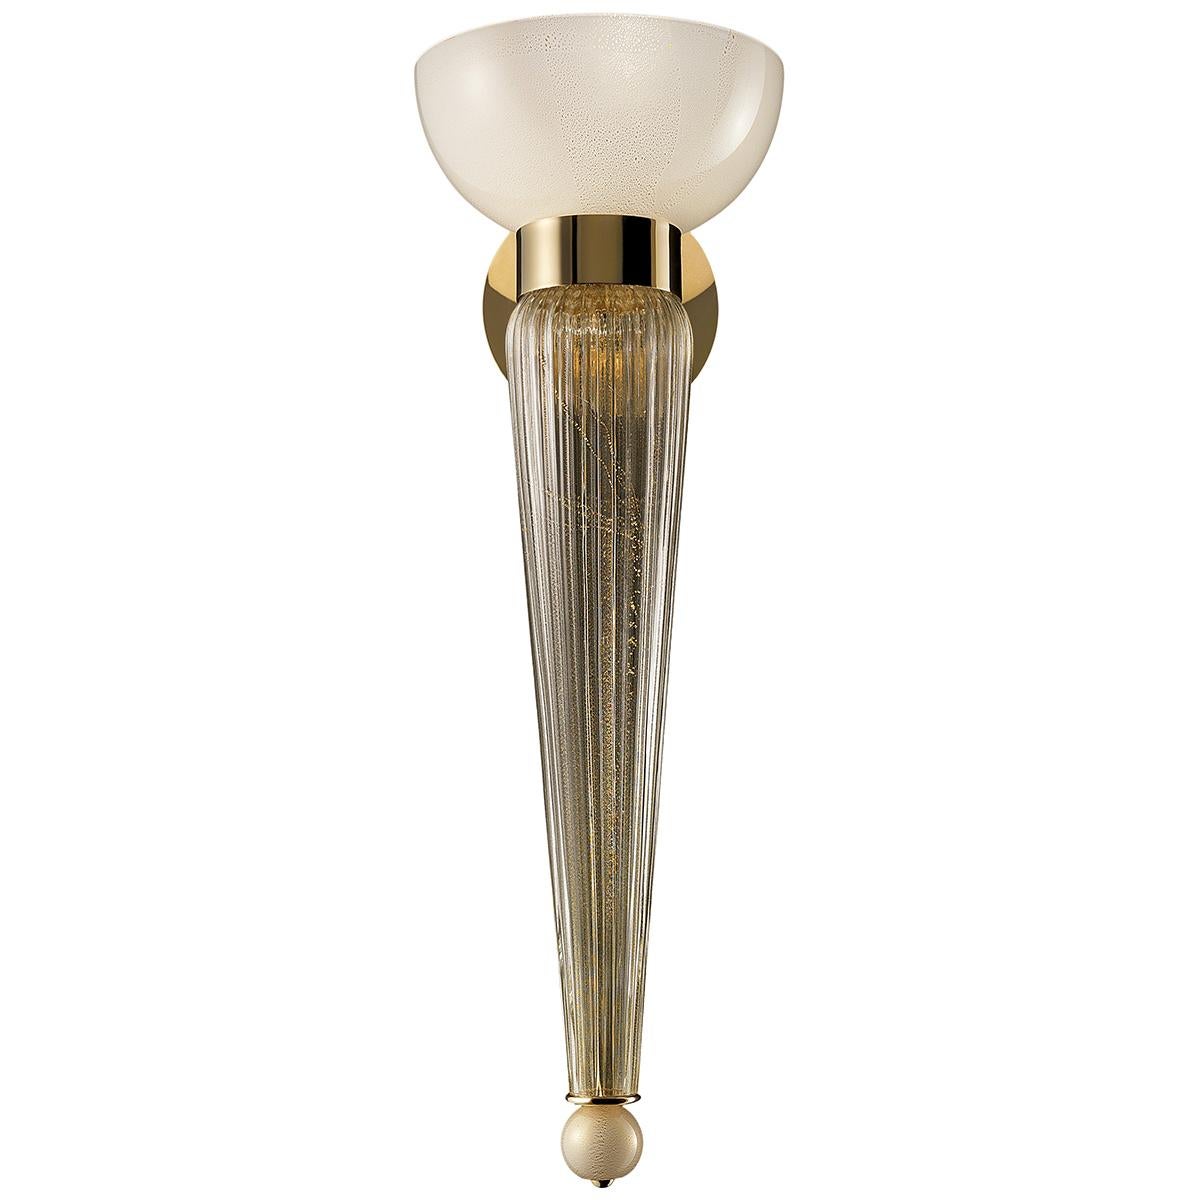 Beige (Beige Gold_OB) Torvik 5656 Wall Sconce in Glass with Galvanized Gold Finish, by Barovier&Toso